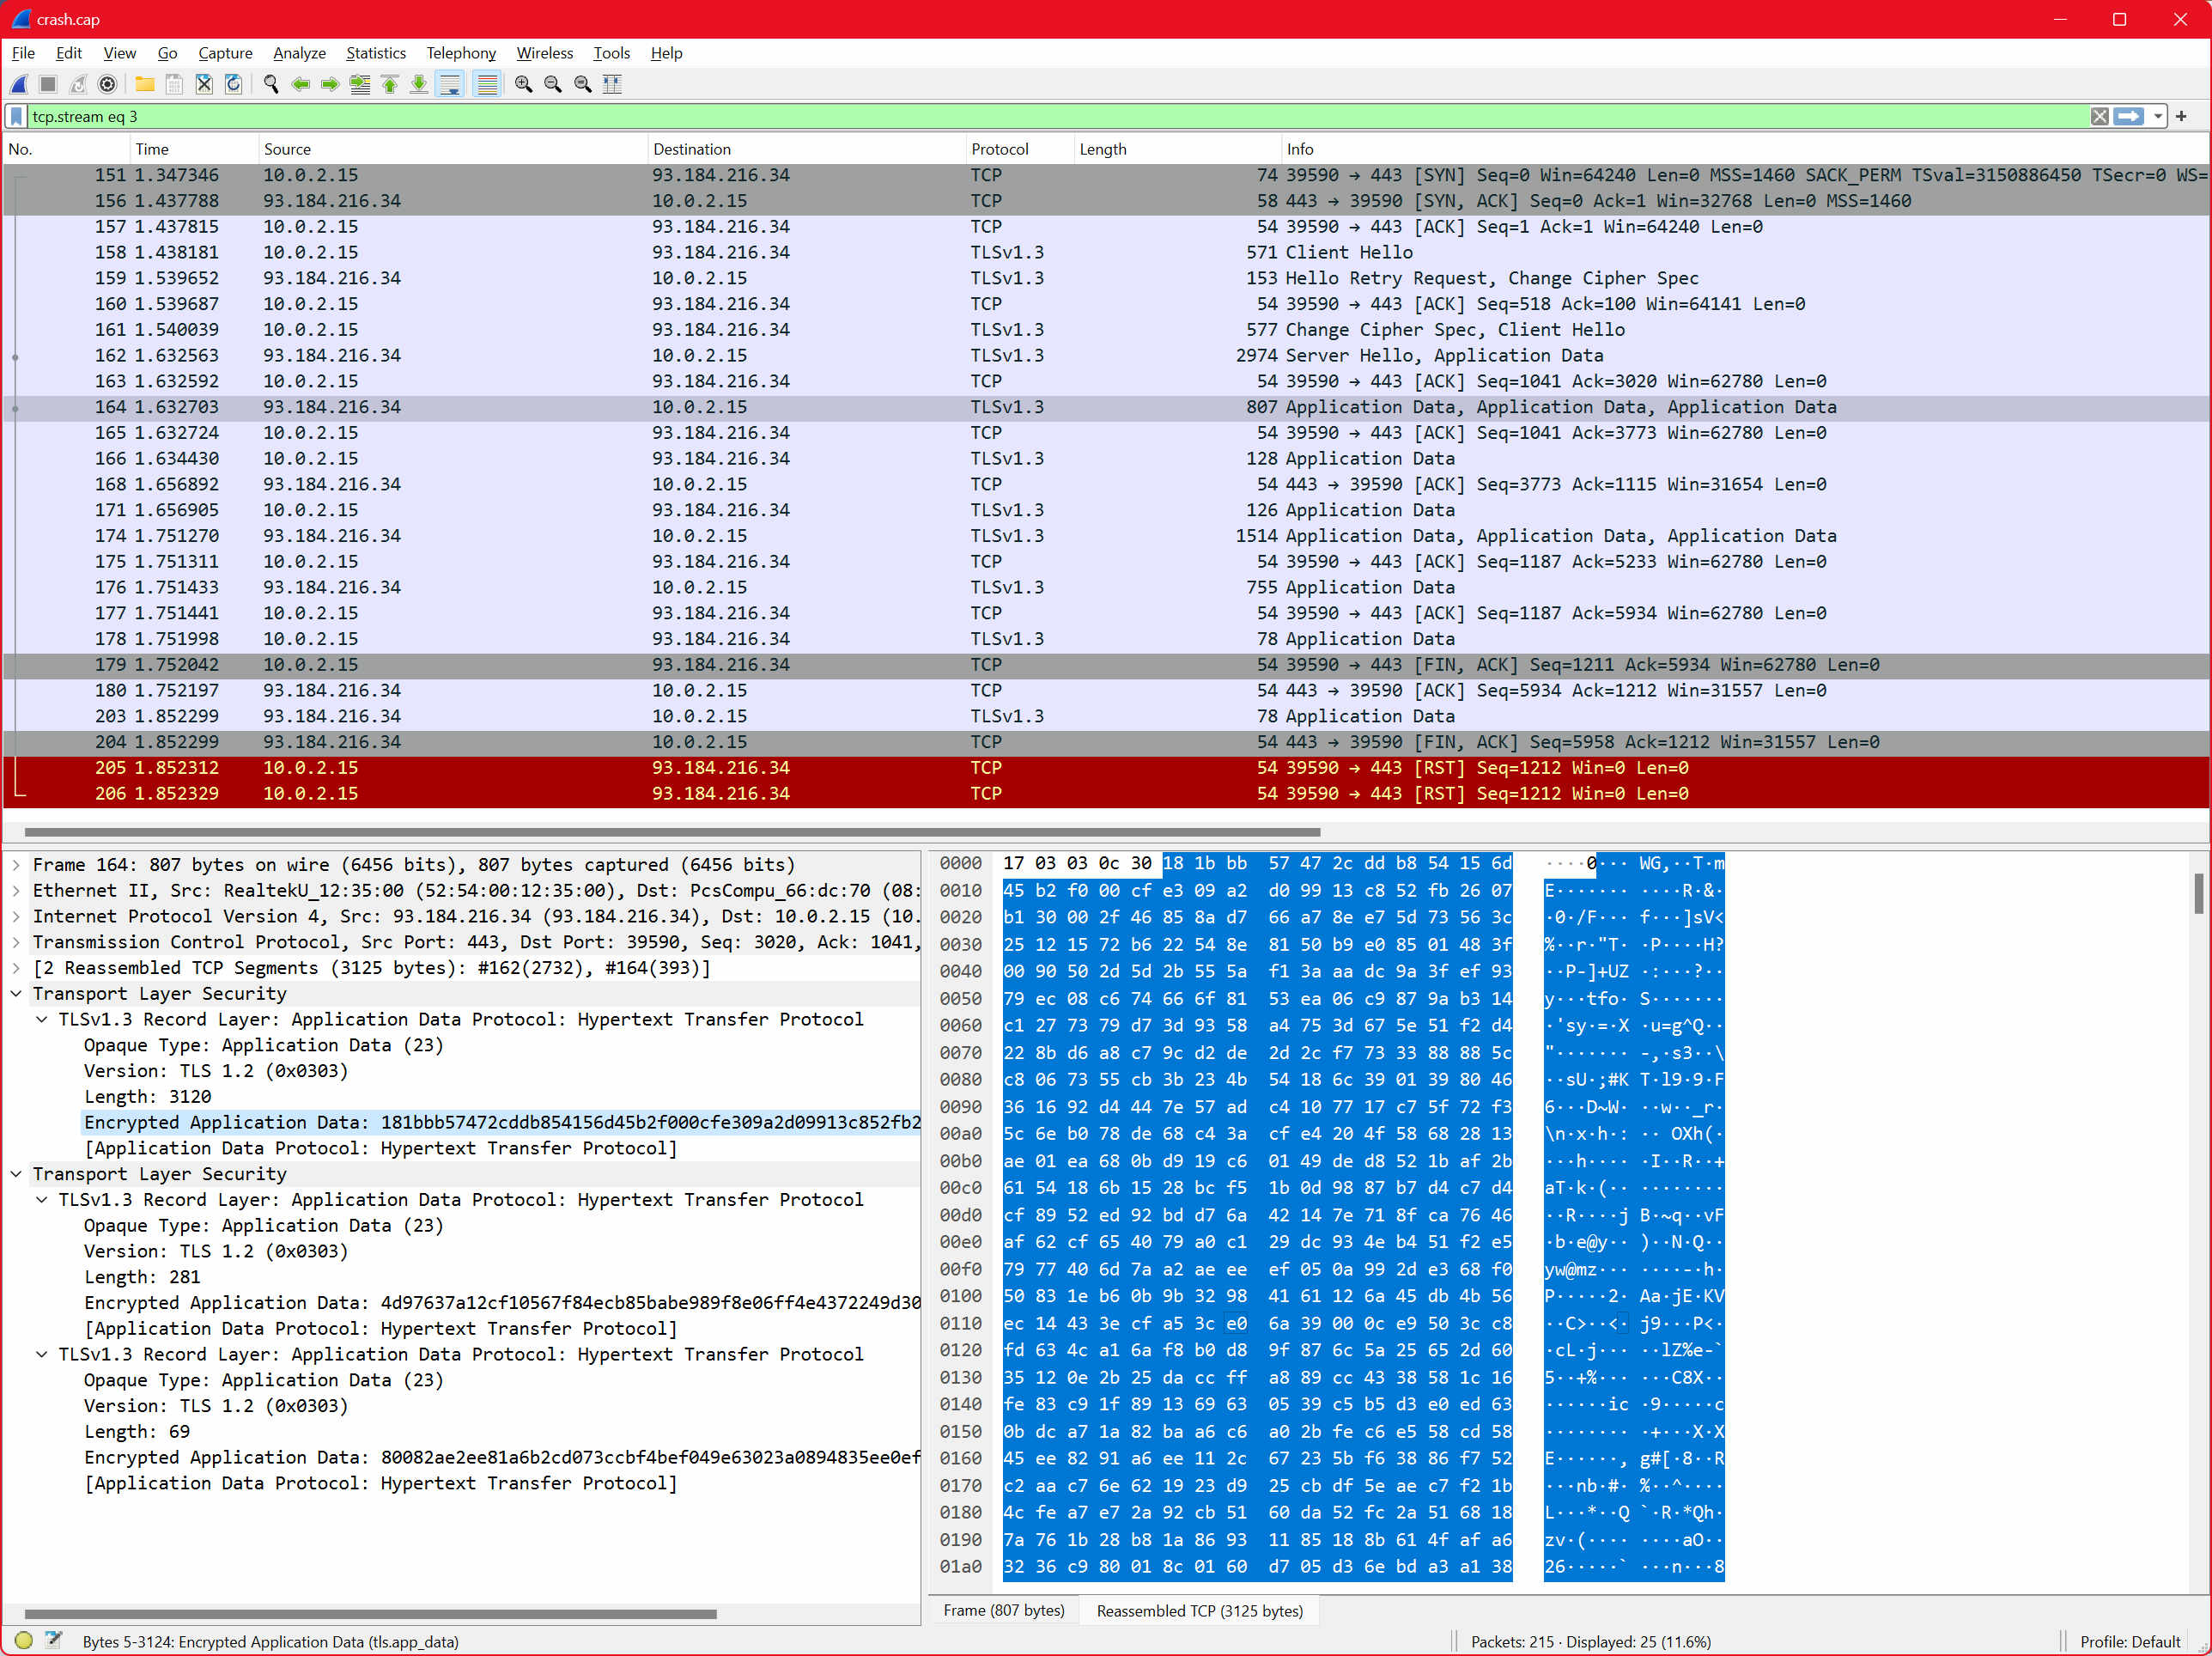 The same wireshark window, except one of the Application Data lines is focused. The structured pane shows a TLSv1.3 record layer with encrypted application data. No attempt is made at decrypting it.